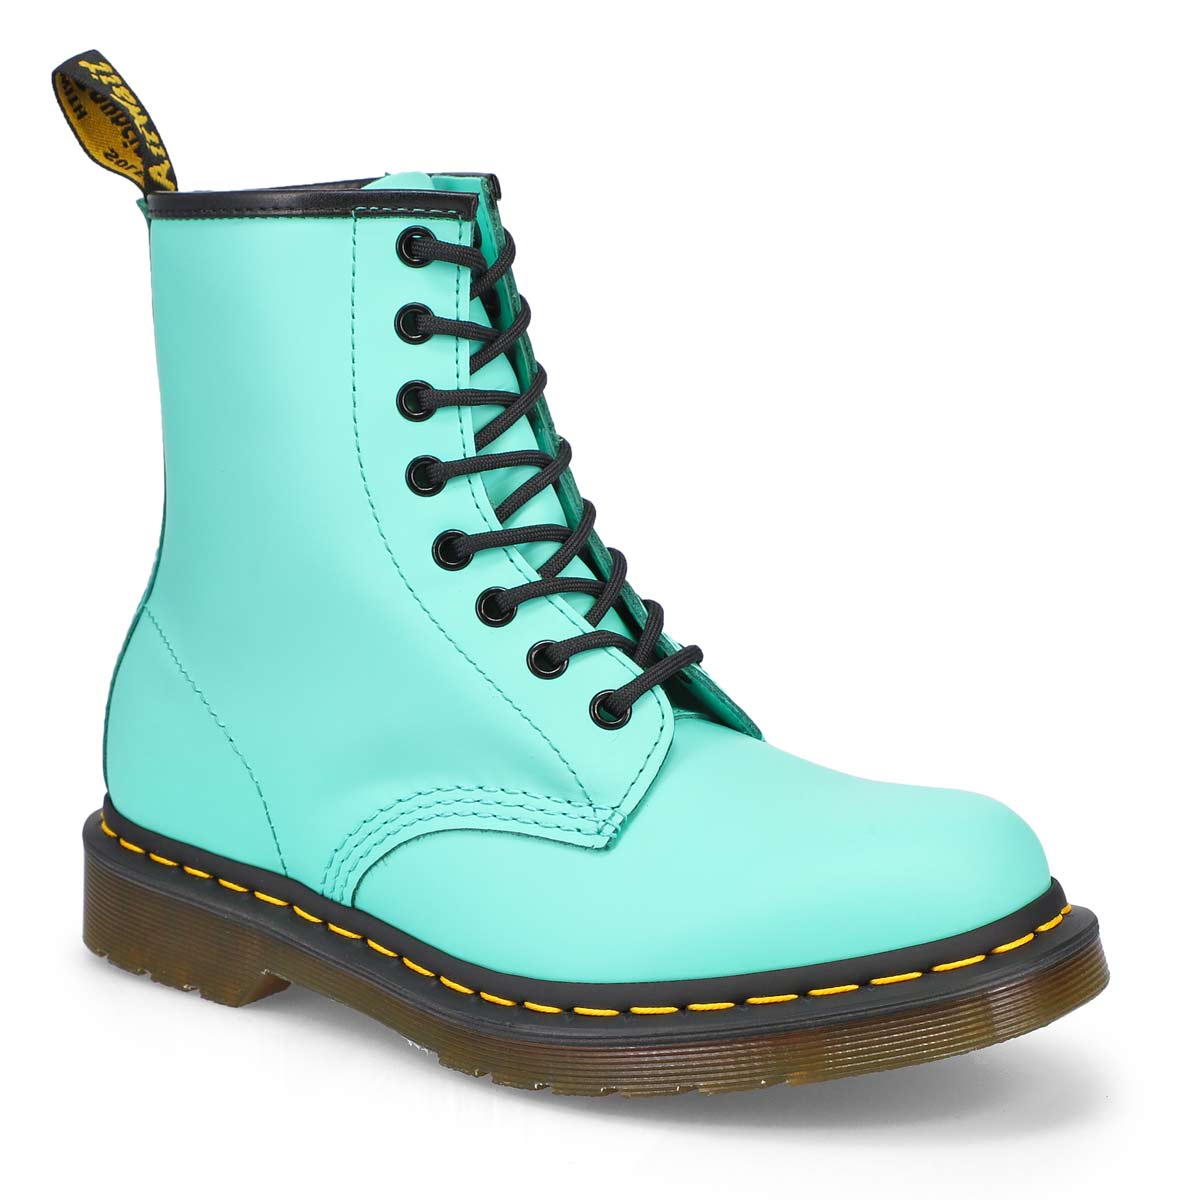 Dr Martens Women's 1460 8-Eye Smooth Leather | SoftMoc.com